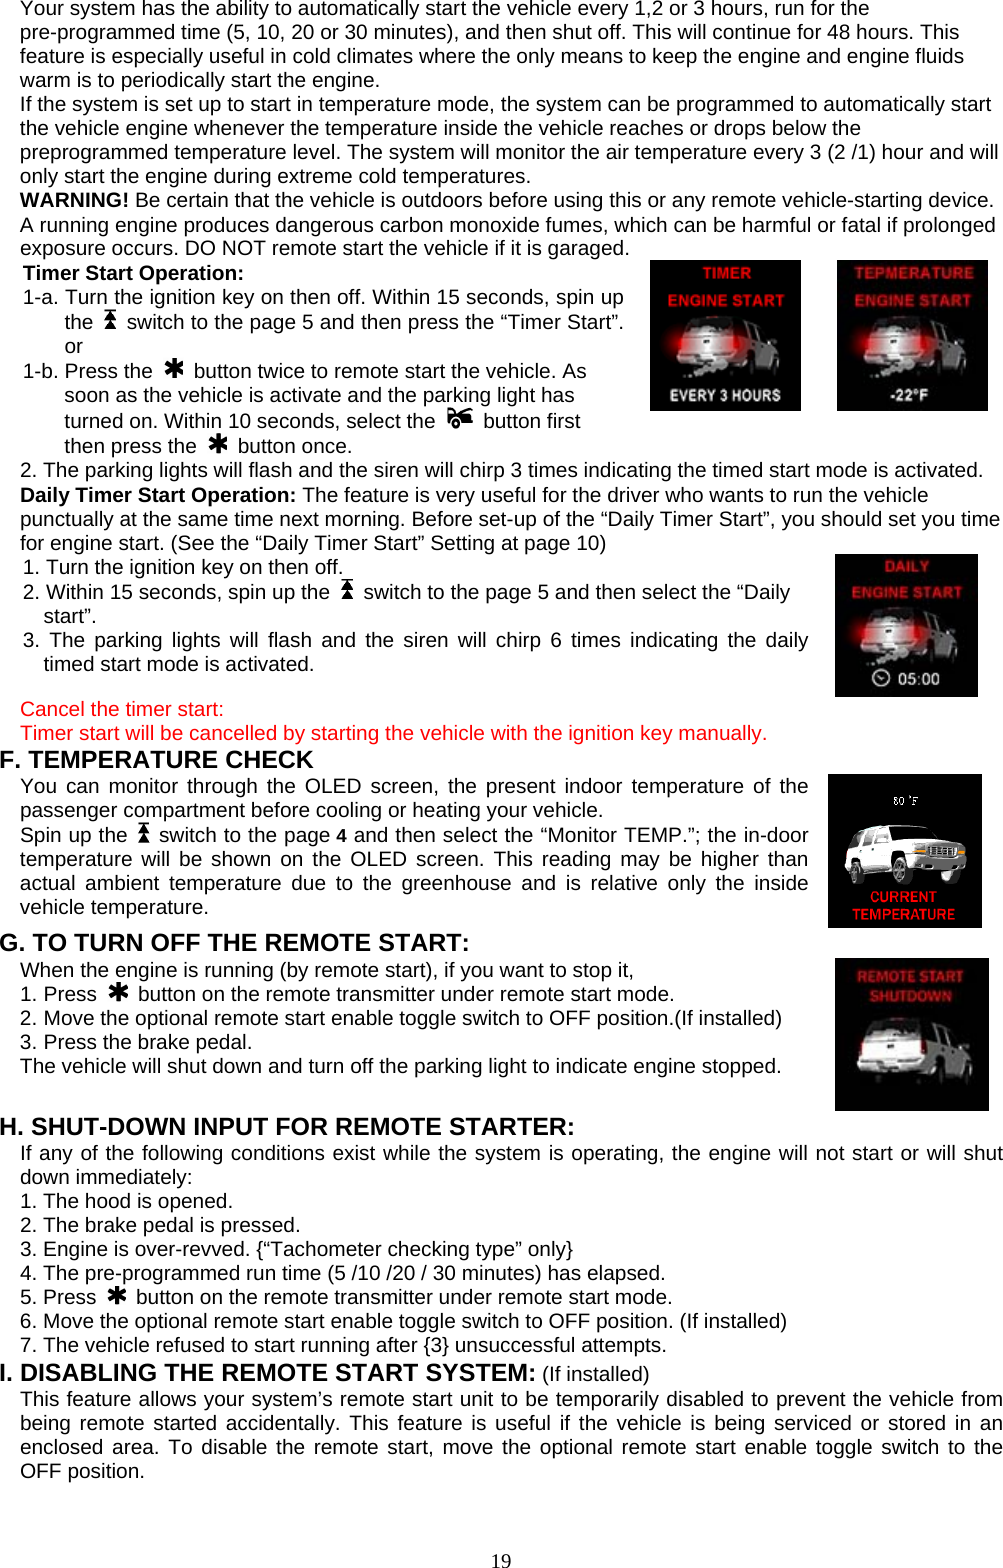  Your system has the ability to automatically start the vehicle every 1,2 or 3 hours, run for the pre-programmed time (5, 10, 20 or 30 minutes), and then shut off. This will continue for 48 hours. This feature is especially useful in cold climates where the only means to keep the engine and engine fluids warm is to periodically start the engine. If the system is set up to start in temperature mode, the system can be programmed to automatically start the vehicle engine whenever the temperature inside the vehicle reaches or drops below the preprogrammed temperature level. The system will monitor the air temperature every 3 (2 /1) hour and will only start the engine during extreme cold temperatures. WARNING! Be certain that the vehicle is outdoors before using this or any remote vehicle-starting device. A running engine produces dangerous carbon monoxide fumes, which can be harmful or fatal if prolonged exposure occurs. DO NOT remote start the vehicle if it is garaged. Timer Start Operation: 1-a. Turn the ignition key on then off. Within 15 seconds, spin up the    switch to the page 5 and then press the “Timer Start”. or  1-b. Press the    button twice to remote start the vehicle. As soon as the vehicle is activate and the parking light has turned on. Within 10 seconds, select the   button first then press the   button once.  2. The parking lights will flash and the siren will chirp 3 times indicating the timed start mode is activated. Daily Timer Start Operation: The feature is very useful for the driver who wants to run the vehicle   punctually at the same time next morning. Before set-up of the “Daily Timer Start”, you should set you time for engine start. (See the “Daily Timer Start” Setting at page 10) 1. Turn the ignition key on then off.    2. Within 15 seconds, spin up the    switch to the page 5 and then select the “Daily start”.  3. The parking lights will flash and the siren will chirp 6 times indicating the daily timed start mode is activated. Cancel the timer start:   Timer start will be cancelled by starting the vehicle with the ignition key manually. F. TEMPERATURE CHECK You can monitor through the OLED screen, the present indoor temperature of the passenger compartment before cooling or heating your vehicle.   Spin up the    switch to the page 4 and then select the “Monitor TEMP.”; the in-door temperature will be shown on the OLED screen. This reading may be higher than actual ambient temperature due to the greenhouse and is relative only the inside vehicle temperature. G. TO TURN OFF THE REMOTE START: When the engine is running (by remote start), if you want to stop it,   1. Press   button on the remote transmitter under remote start mode. 2. Move the optional remote start enable toggle switch to OFF position.(If installed)   3. Press the brake pedal. The vehicle will shut down and turn off the parking light to indicate engine stopped. H. SHUT-DOWN INPUT FOR REMOTE STARTER: If any of the following conditions exist while the system is operating, the engine will not start or will shut down immediately: 1. The hood is opened. 2. The brake pedal is pressed. 3. Engine is over-revved. {“Tachometer checking type” only} 4. The pre-programmed run time (5 /10 /20 / 30 minutes) has elapsed. 5. Press   button on the remote transmitter under remote start mode. 6. Move the optional remote start enable toggle switch to OFF position. (If installed) 7. The vehicle refused to start running after {3} unsuccessful attempts. I. DISABLING THE REMOTE START SYSTEM: (If installed) This feature allows your system’s remote start unit to be temporarily disabled to prevent the vehicle from being remote started accidentally. This feature is useful if the vehicle is being serviced or stored in an enclosed area. To disable the remote start, move the optional remote start enable toggle switch to the OFF position.       19